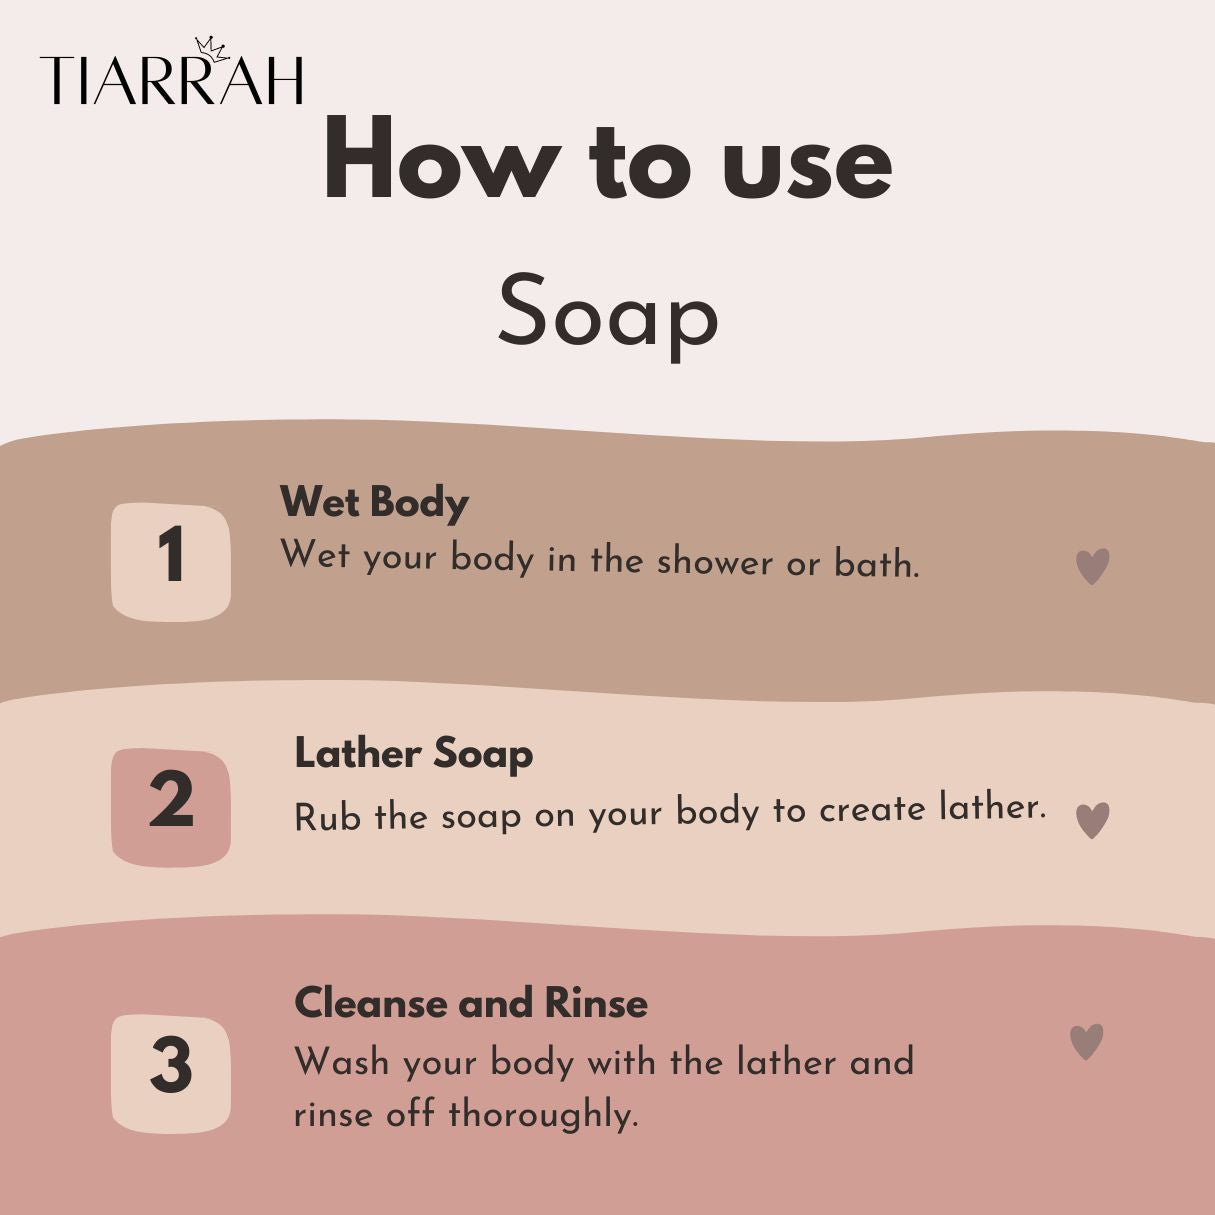 Tiarrah's Charcoal and Peppermint Soap: Pure, Safe, Refreshing - The Luxury Bath and Body Care Shop